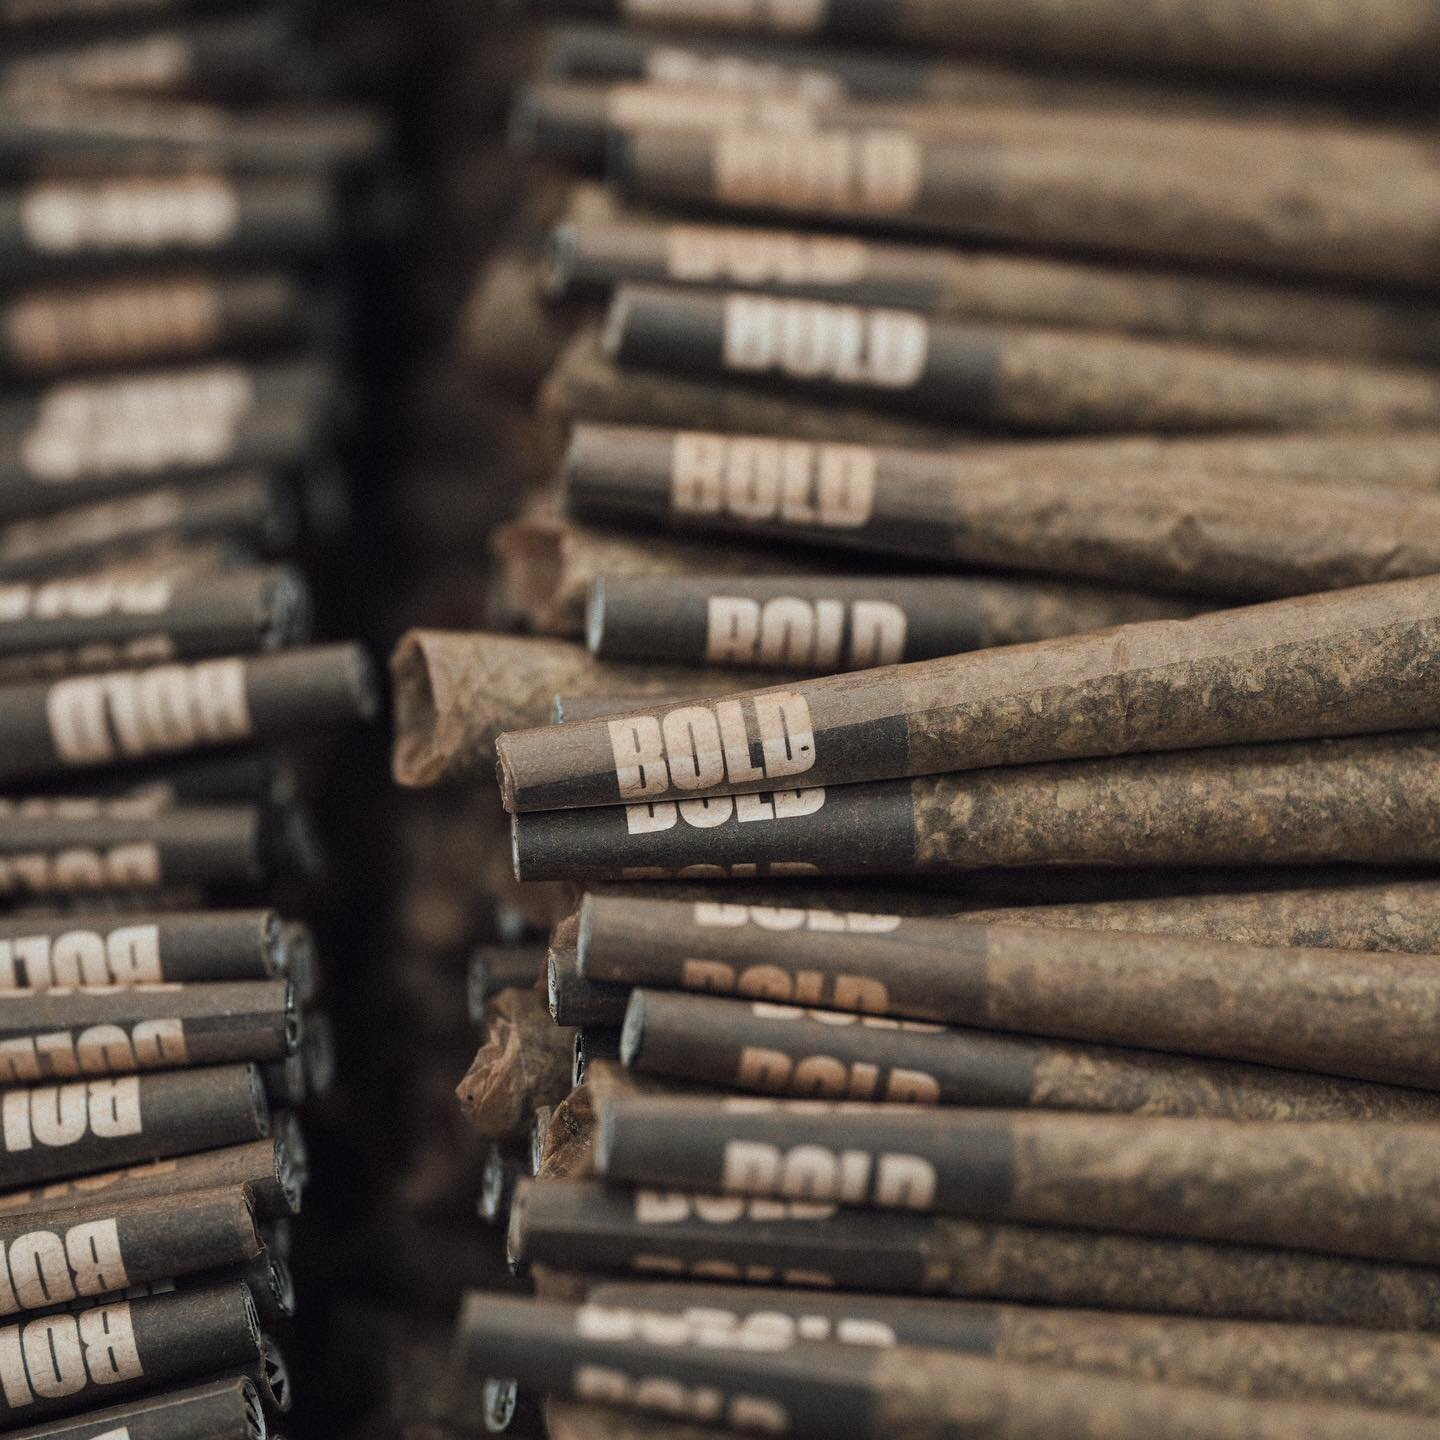 Long weekend ready with our stash of pre-rolls